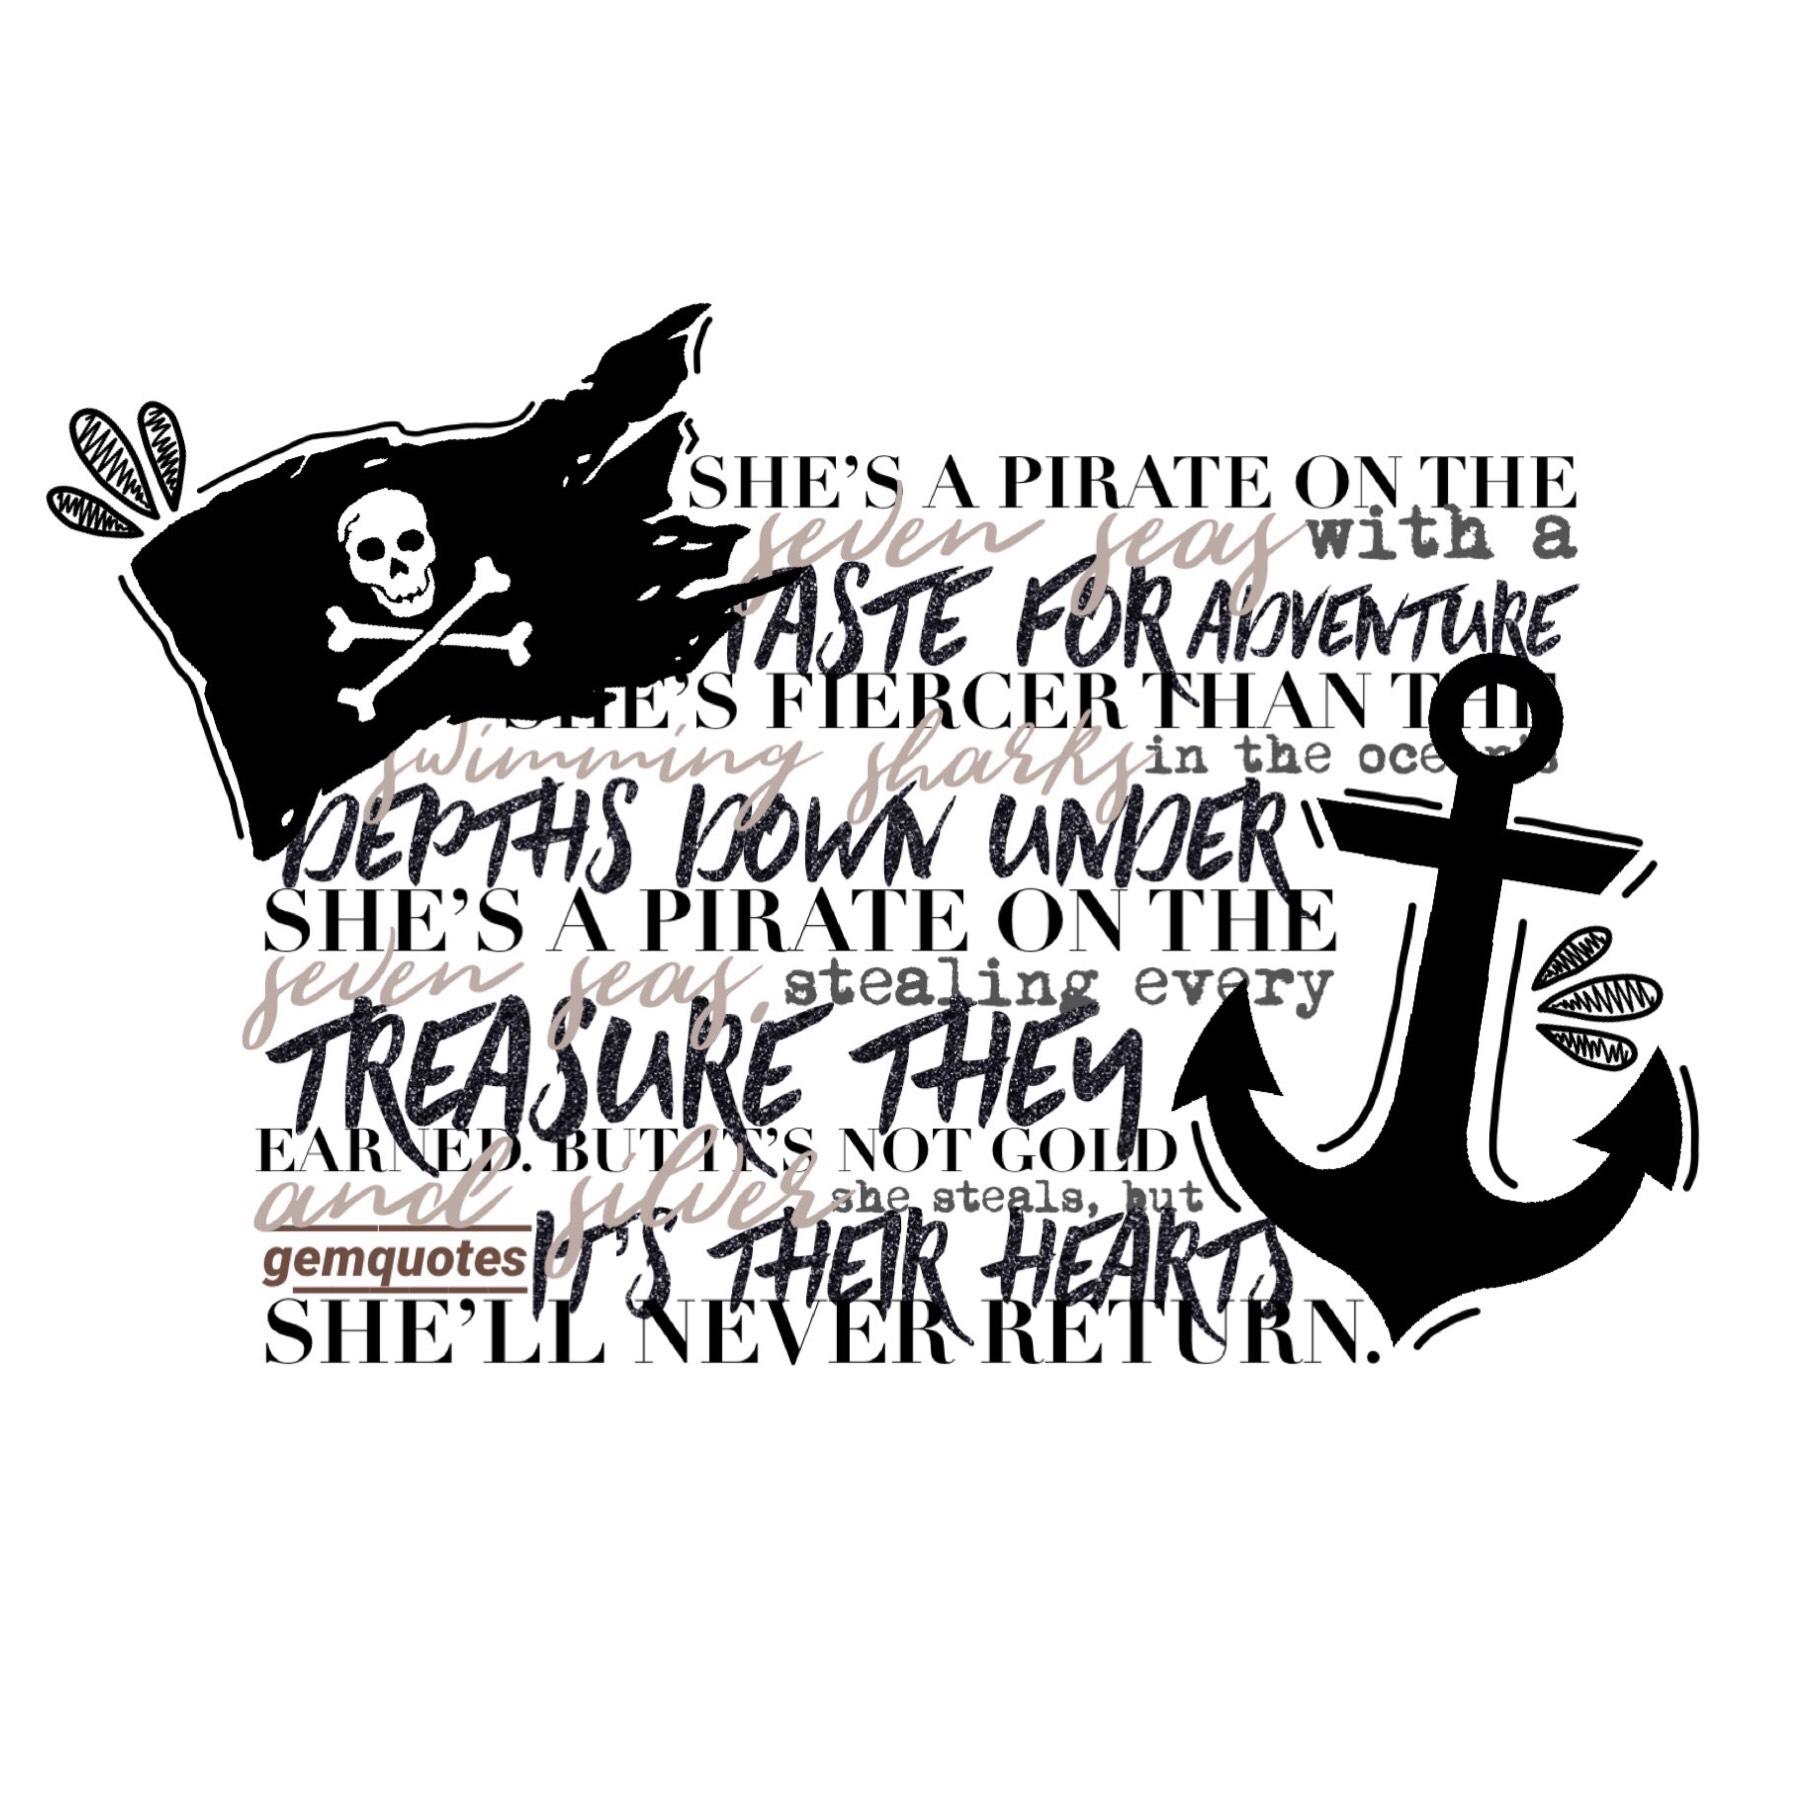 “⚓️tap⚓️”
Poem by me :) Hope u guys are well! Listening to “Secrets” by Mary Lambert and luvin it. I listen to a lot of music if ya couldn’t tell😂 QOTD: fav song? AOTD: too many to choose from, but maybe “Capsize” by FRENSHIP. Sending good days~☀️